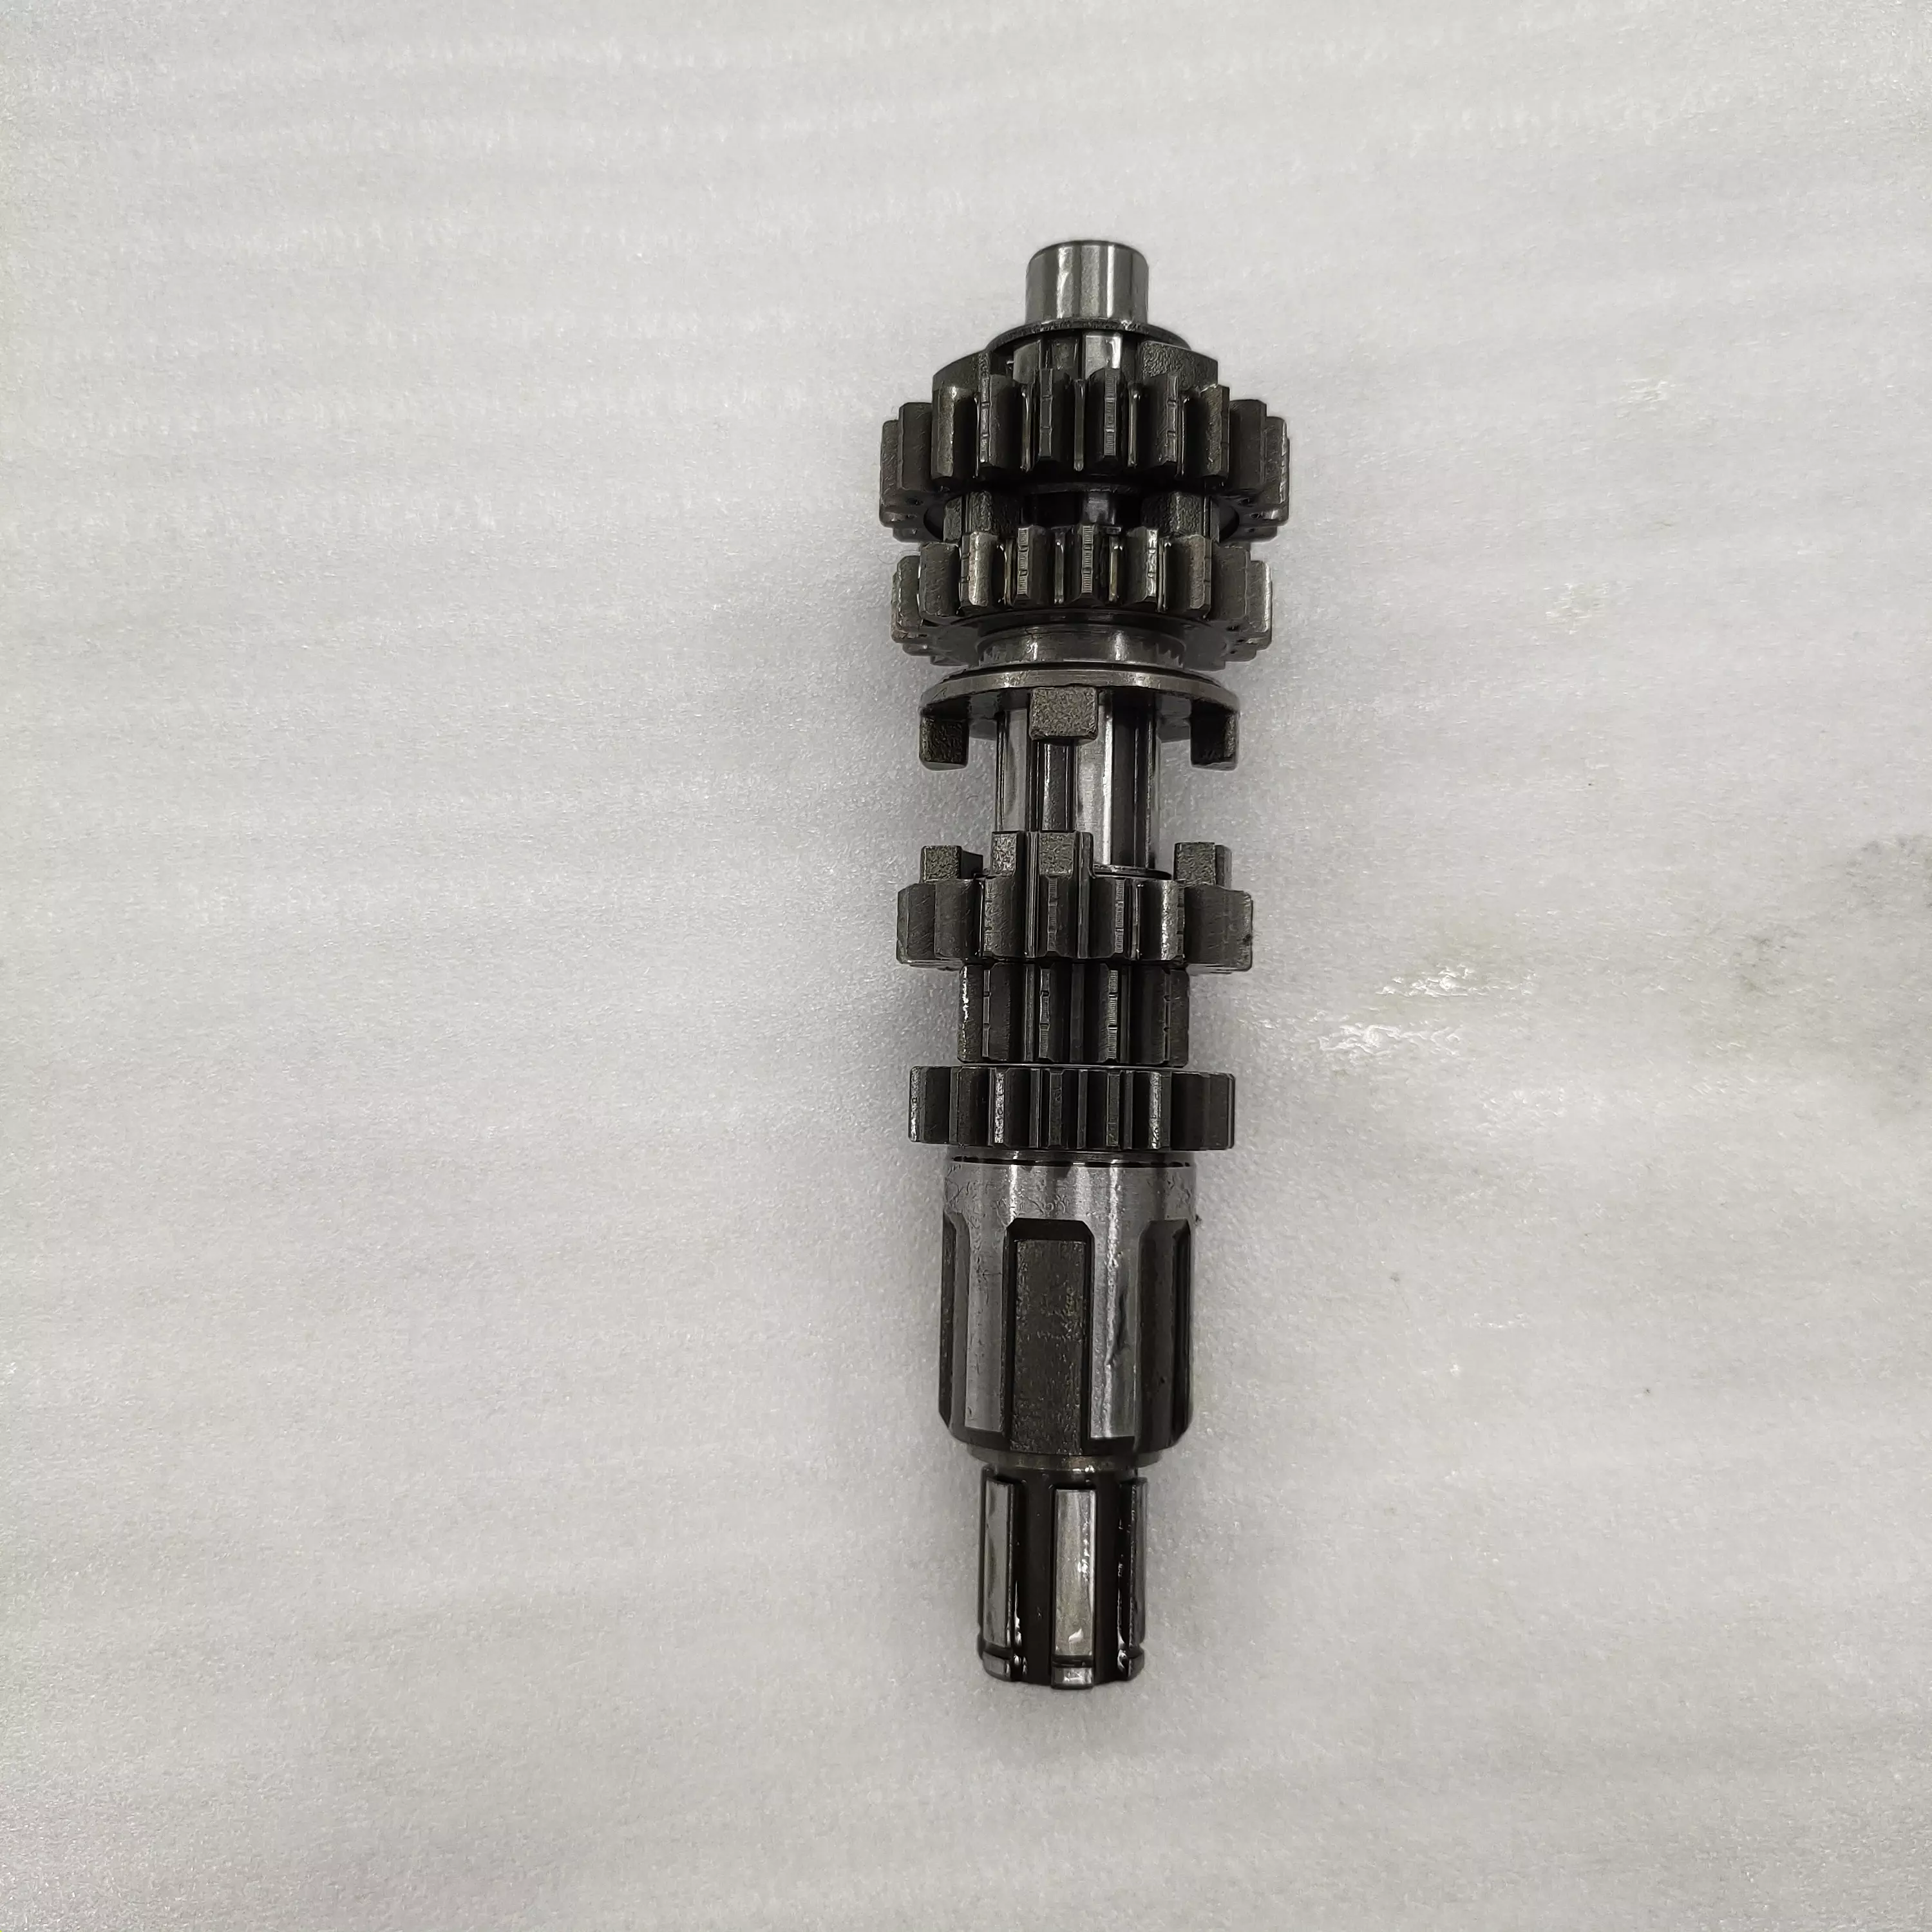 Motorcycle engine  lifan 150cc 250cc Transmission Drive Shaft Gear Engine Gear mainshaft countershaft gear bearing for tricycle